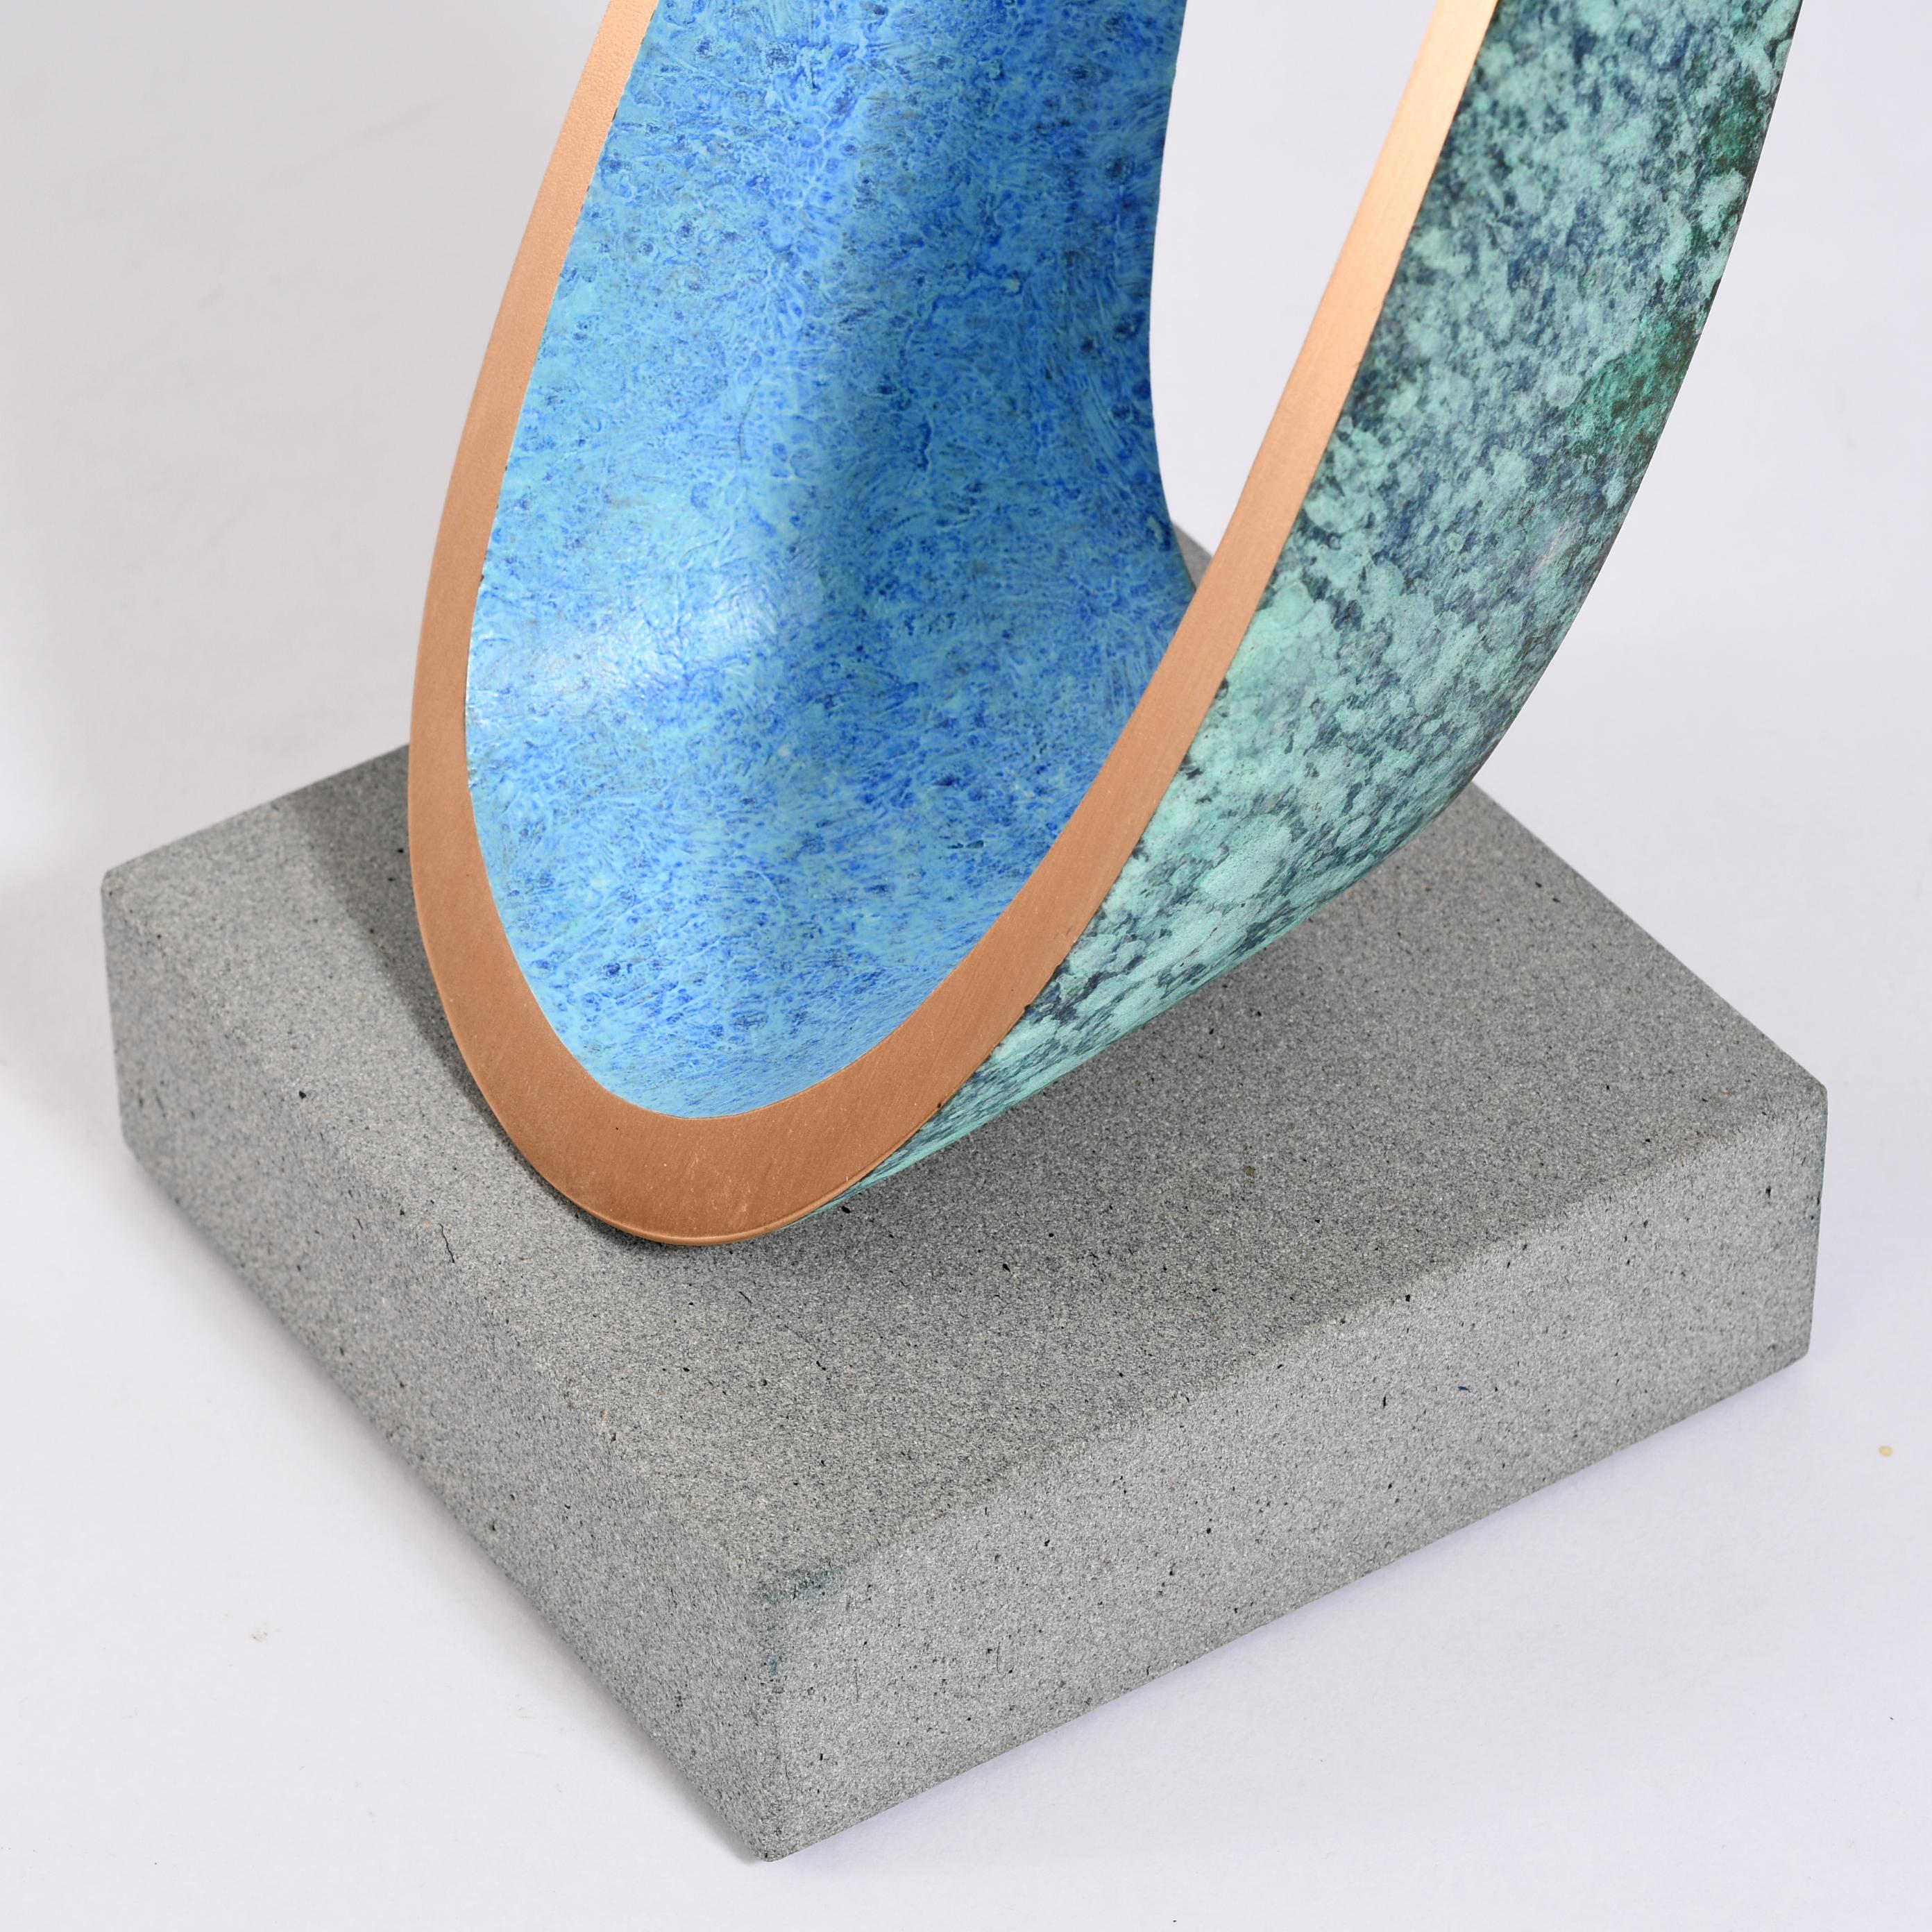 British Contemporary Sculpture by Philip Hearsey - Drift [C] For Sale 4